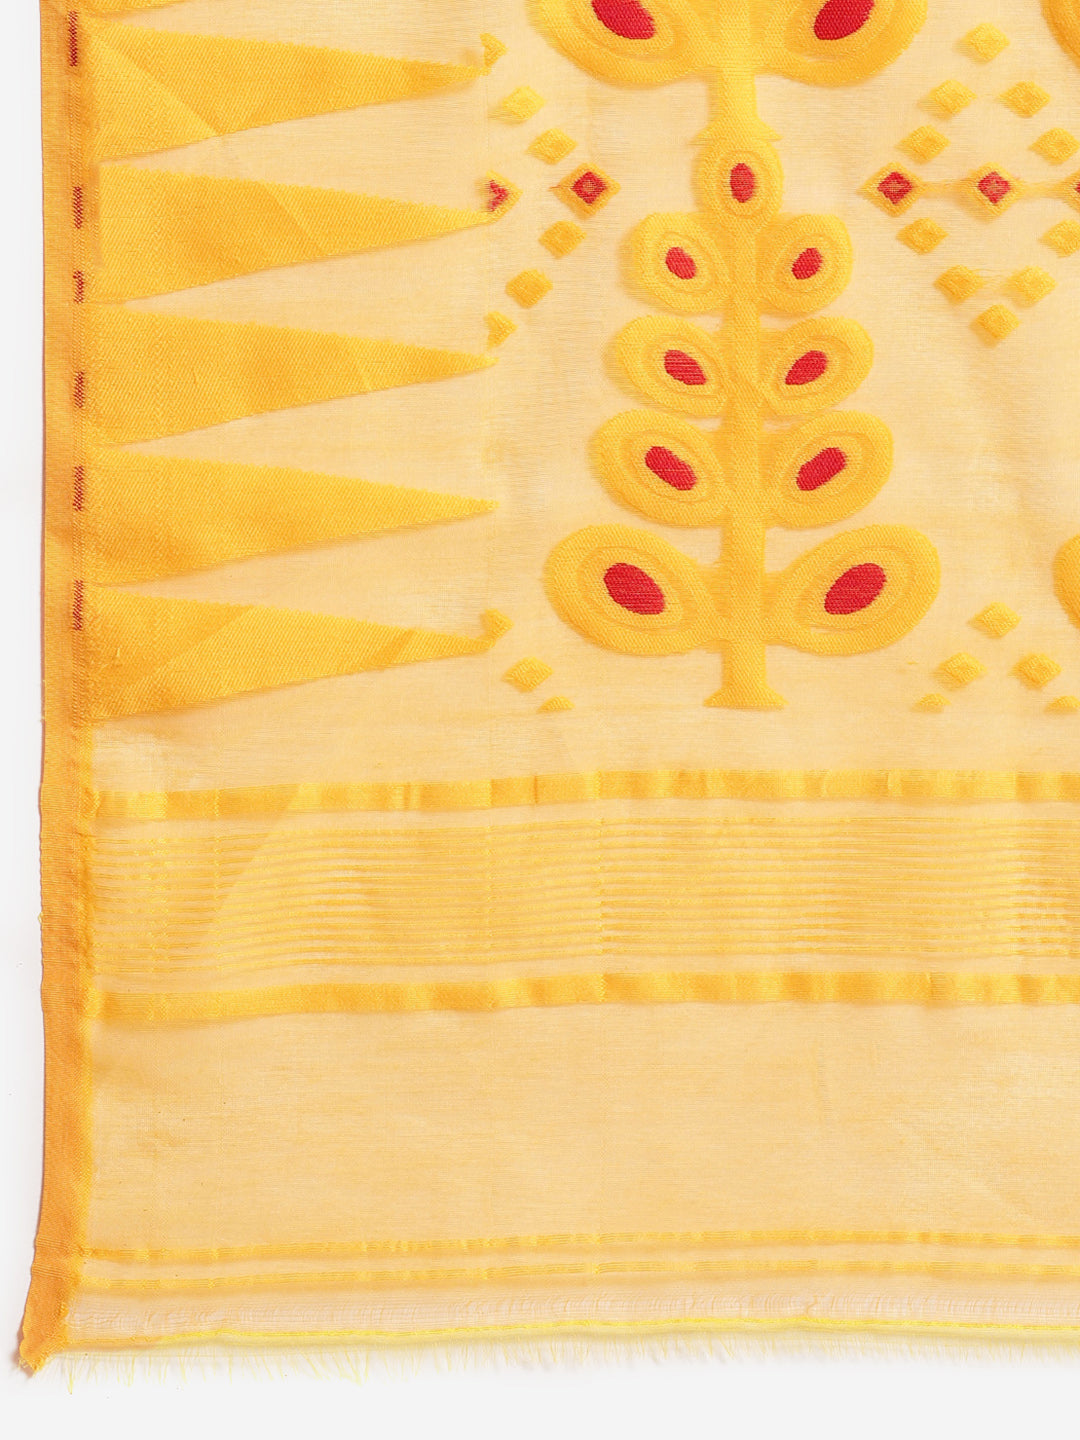 Yellow and Red, Kalakari India Jamdani Silk Cotton Woven Design Saree without blouse CHBHSA0015-Saree-Kalakari India-CHBHSA0015-Bengal, Geographical Indication, Hand Crafted, Hand Painted, Heritage Prints, Jamdani, Natural Dyes, Red, Sarees, Silk Blended, Sustainable Fabrics, Woven, Yellow-[Linen,Ethnic,wear,Fashionista,Handloom,Handicraft,Indigo,blockprint,block,print,Cotton,Chanderi,Blue, latest,classy,party,bollywood,trendy,summer,style,traditional,formal,elegant,unique,style,hand,block,print